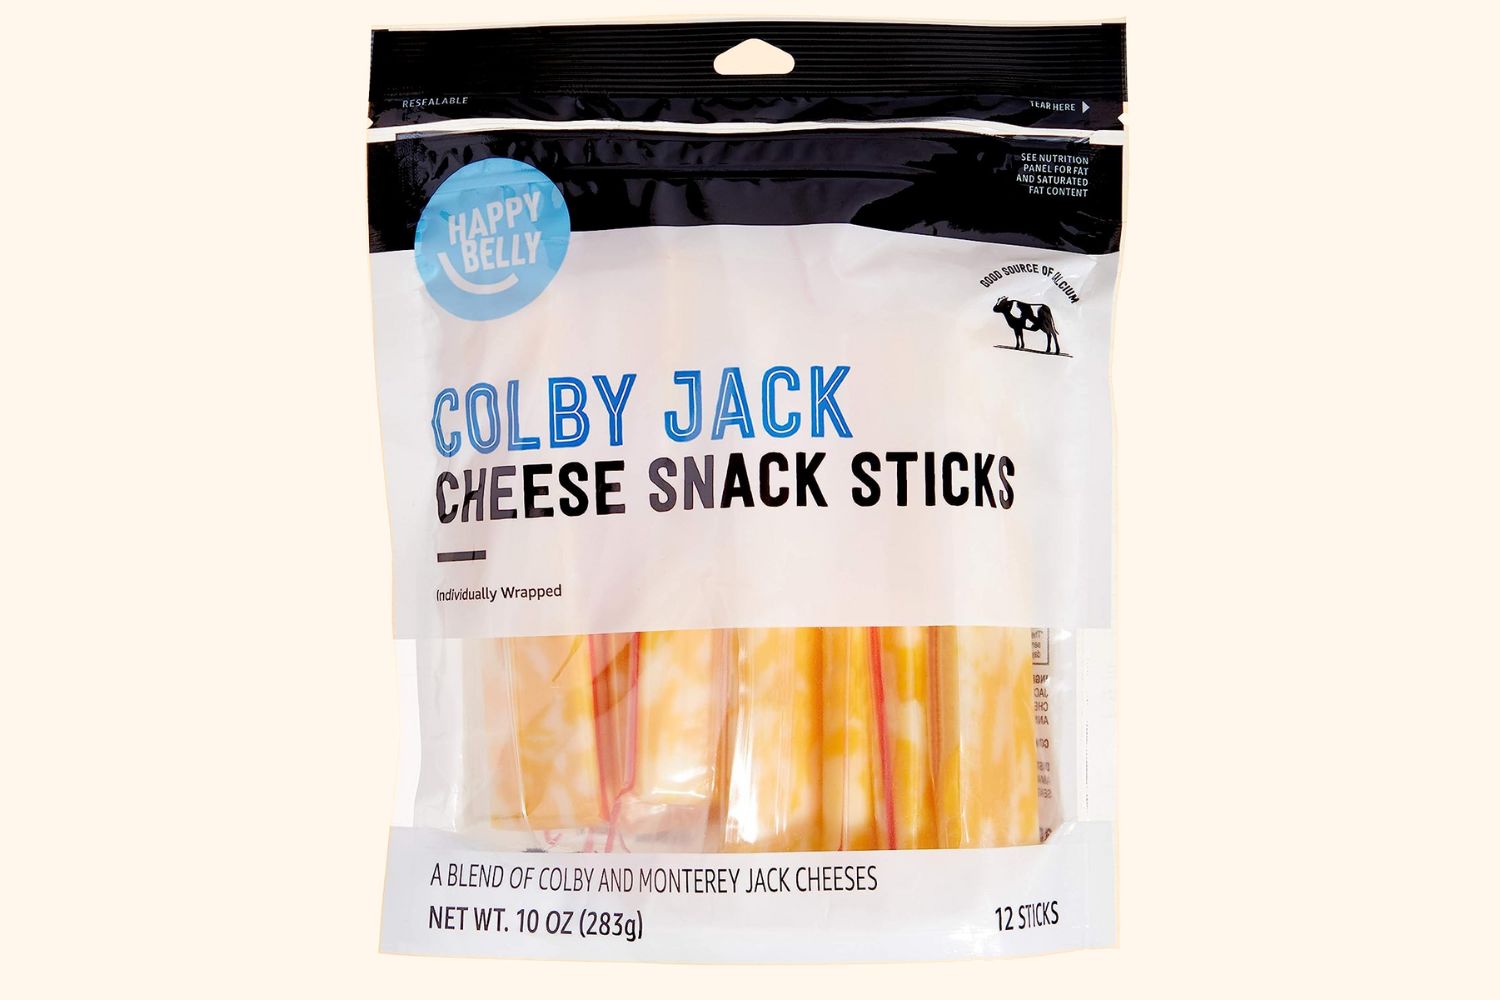 Our choice: Happy Belly's Colby Jack Cheese Snack Sticks